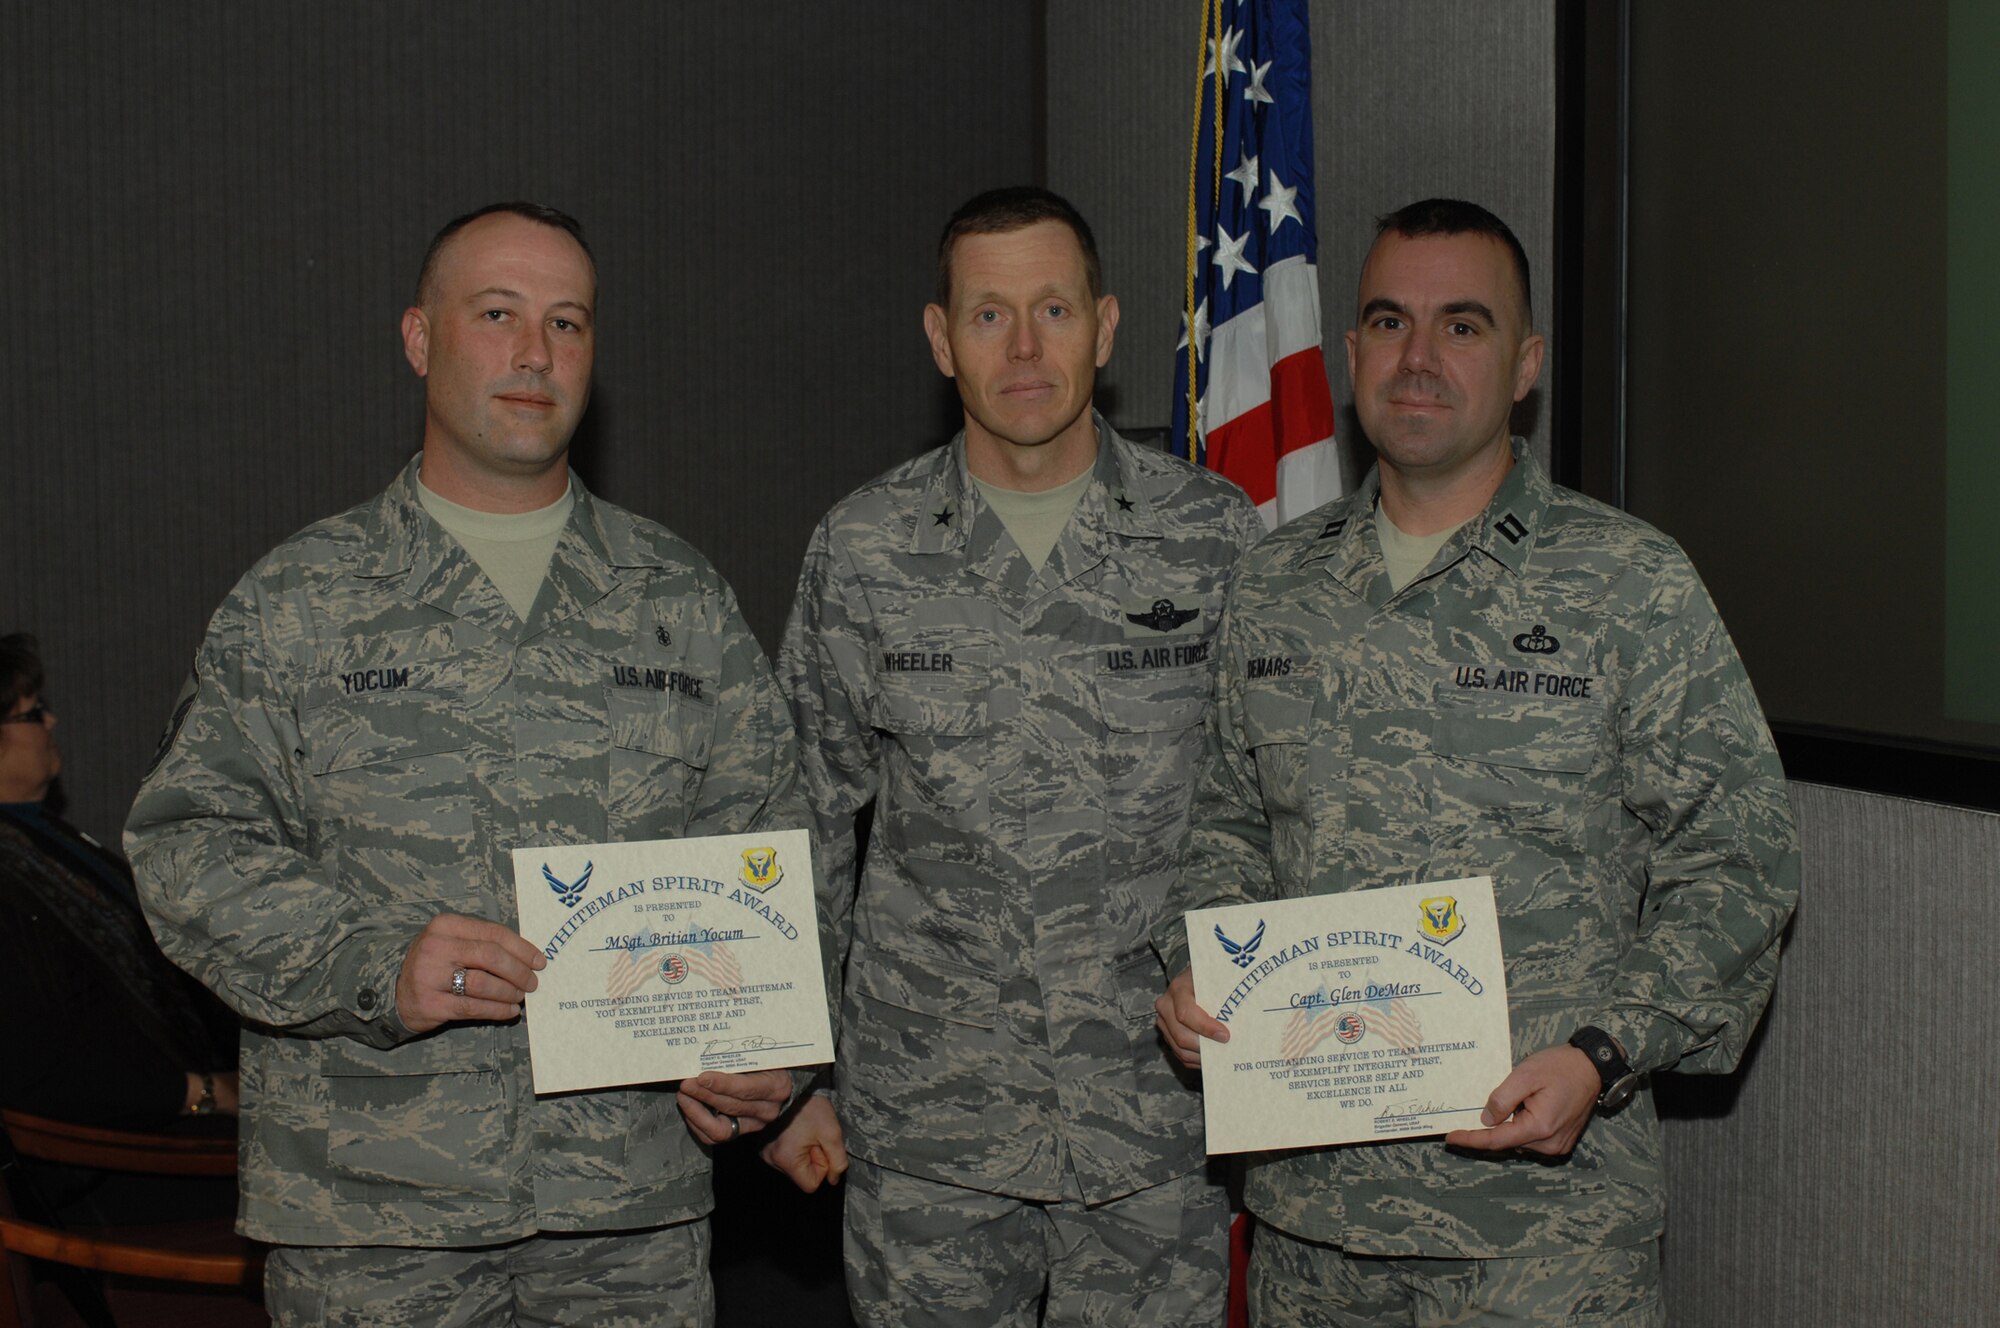 WHITEMAN AIR FORCE BASE, Mo. - Brig. Gen. Robert Wheeler, 509th Bomb Wing commander, presented Capt. Glen DeMars, 509th Operations Support Squadron, and Master Sgt. Britian Yocum, 509th Medical Support Squadron, with the Whiteman Spirit Award Feb. 17, 2010. (U.S. Air Force photo/Staff Sgt. Lauren Padden)